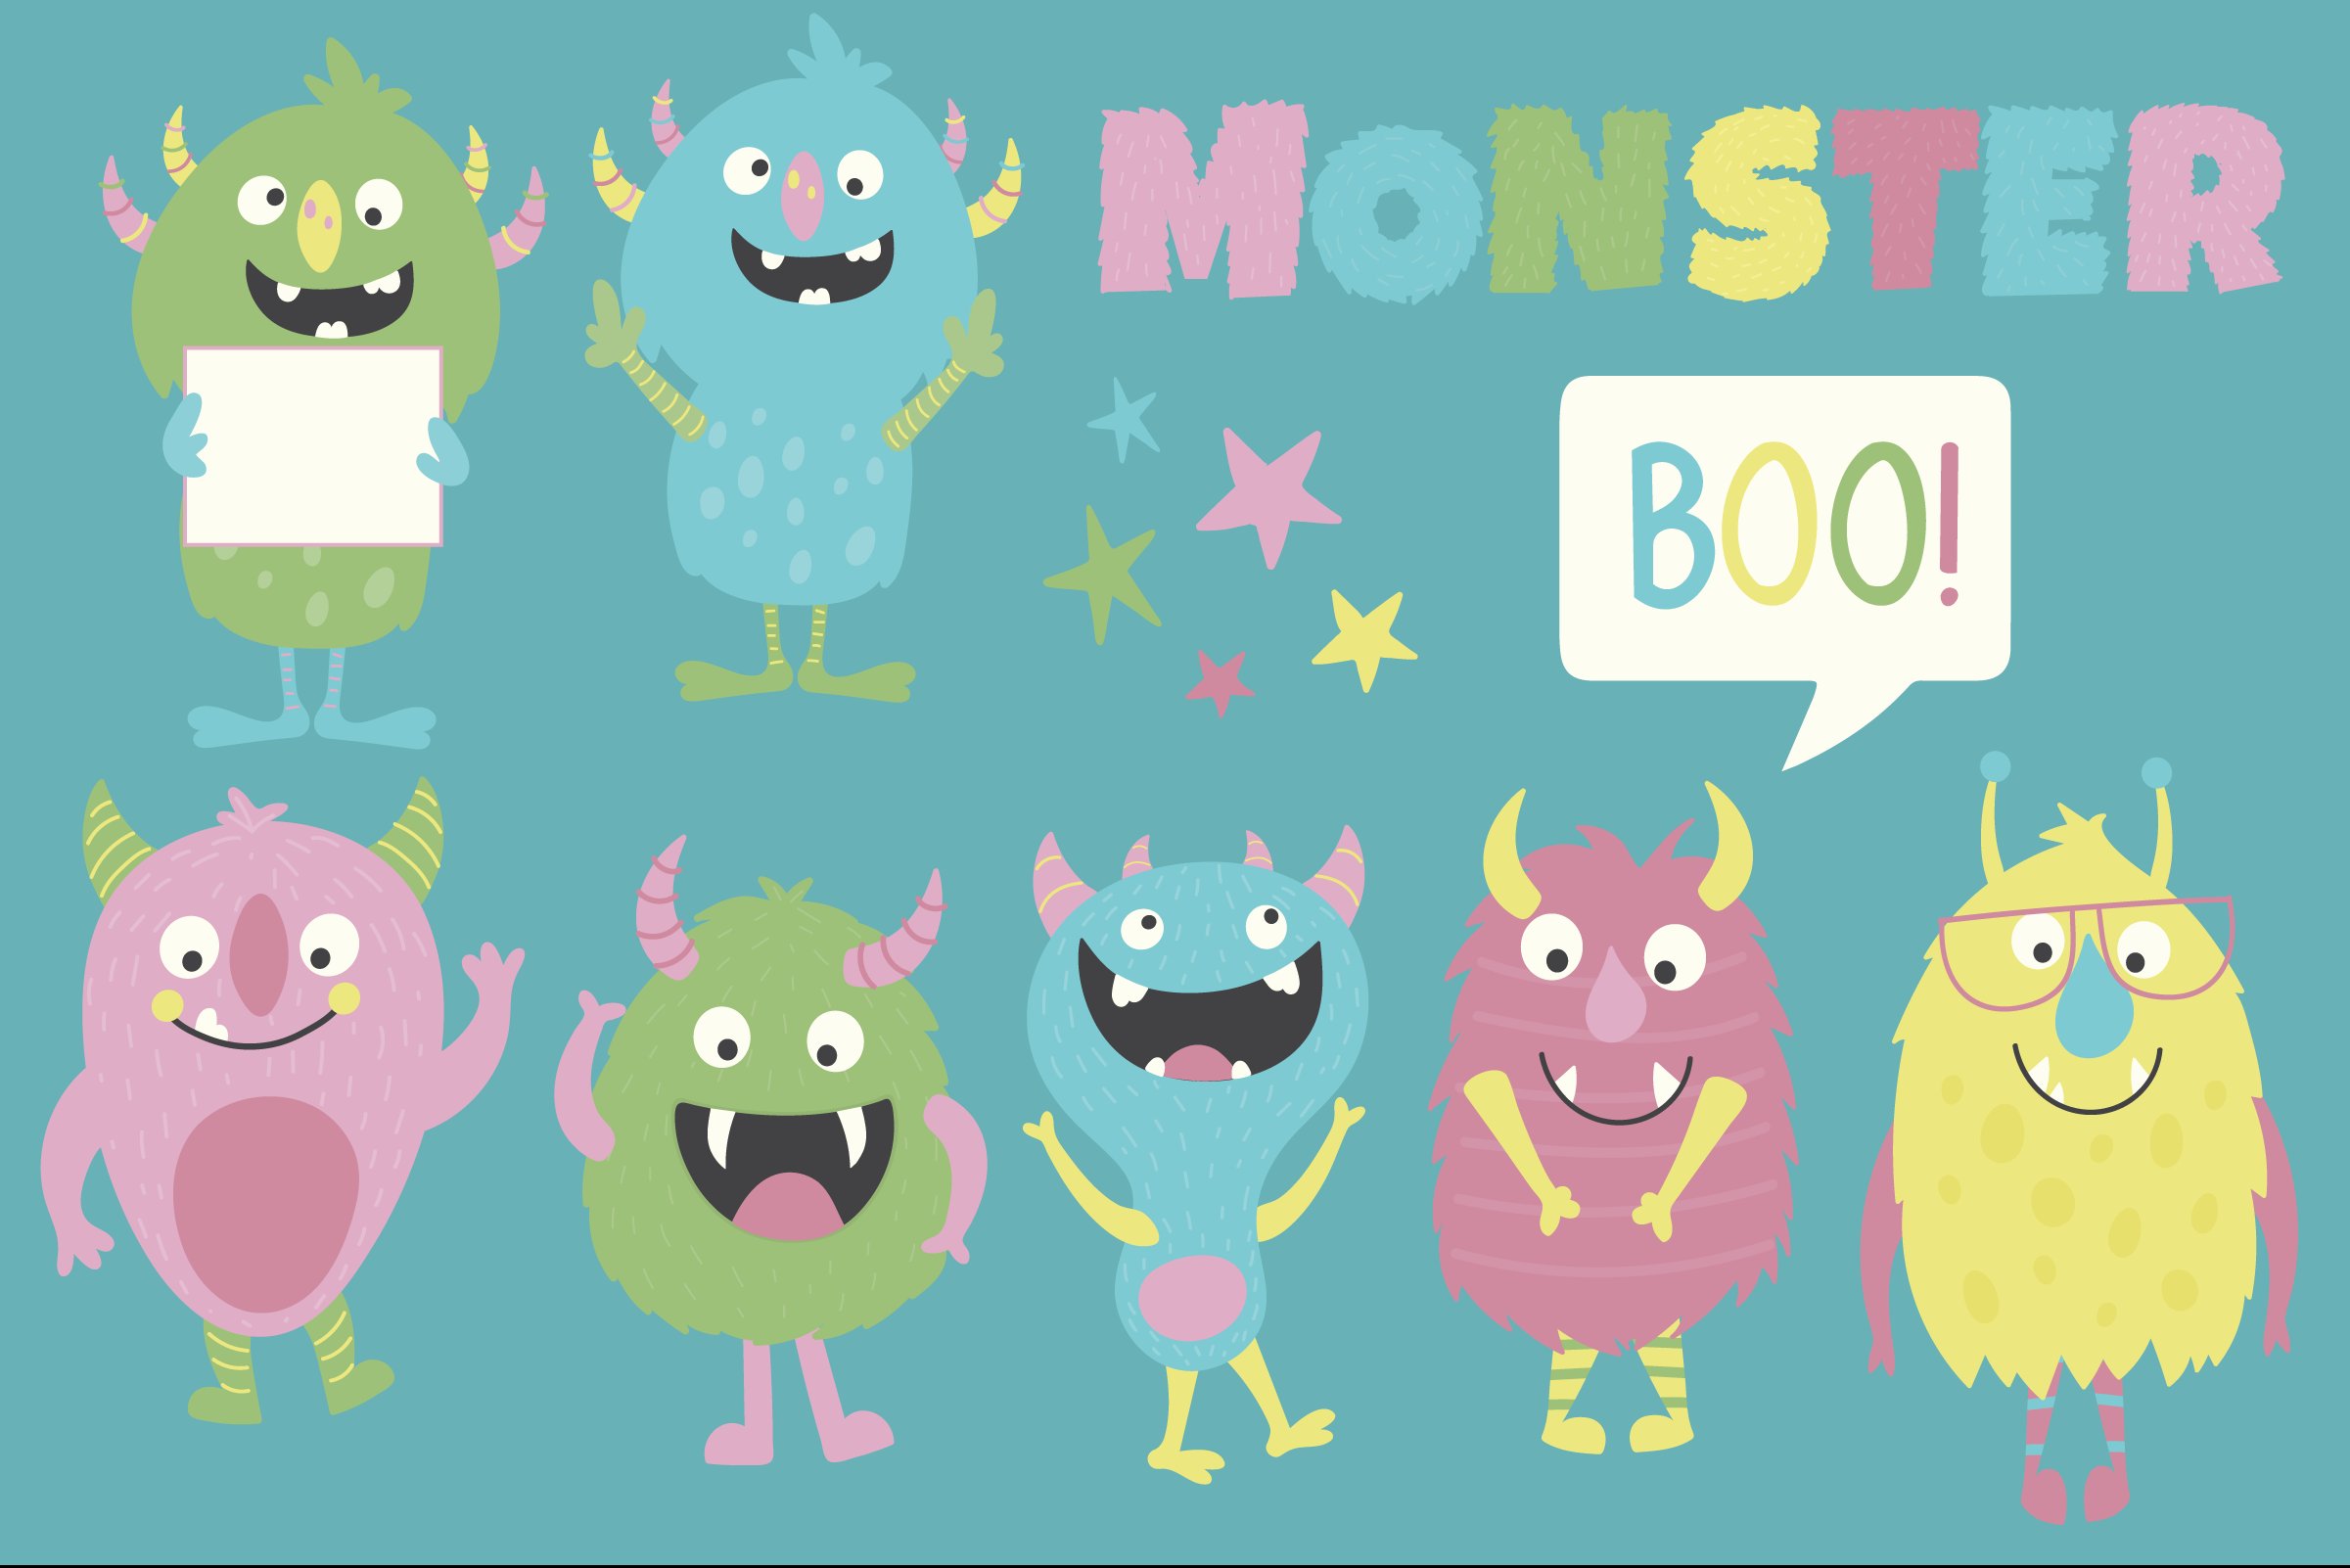 Monsters preview image.